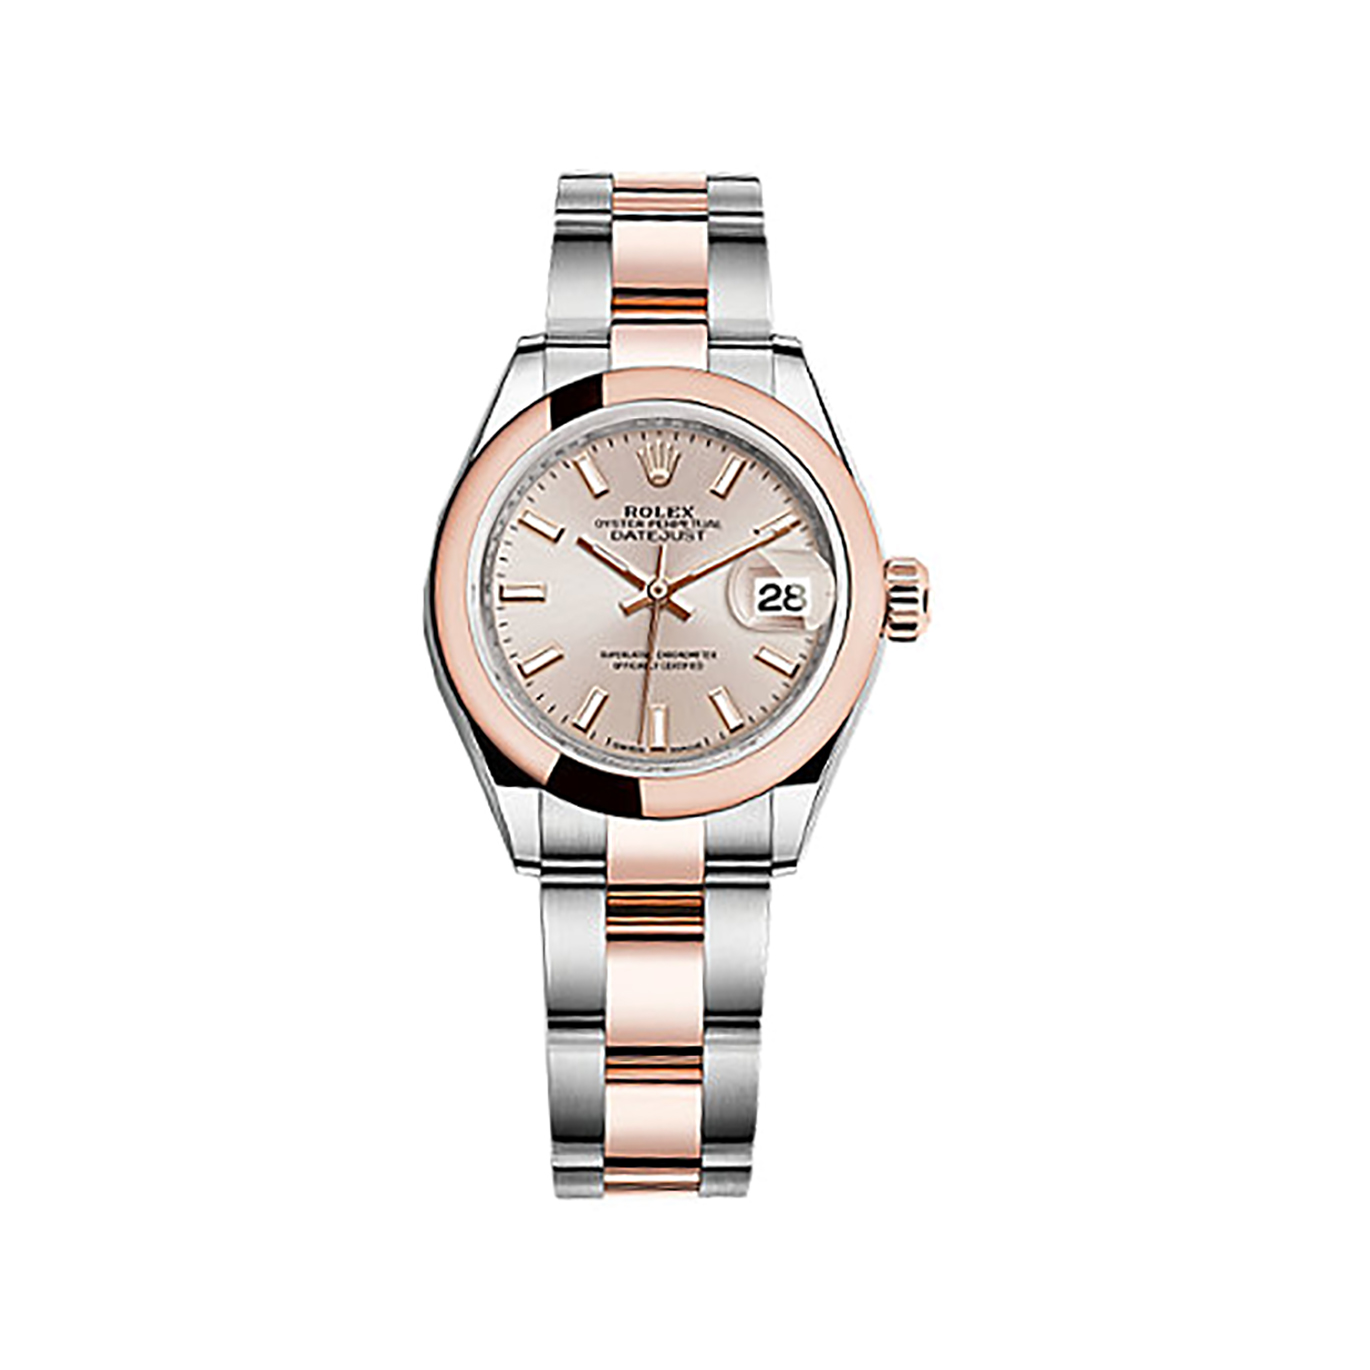 Lady-Datejust 28 279161 Rose Gold & Stainless Steel Watch (Sundust)